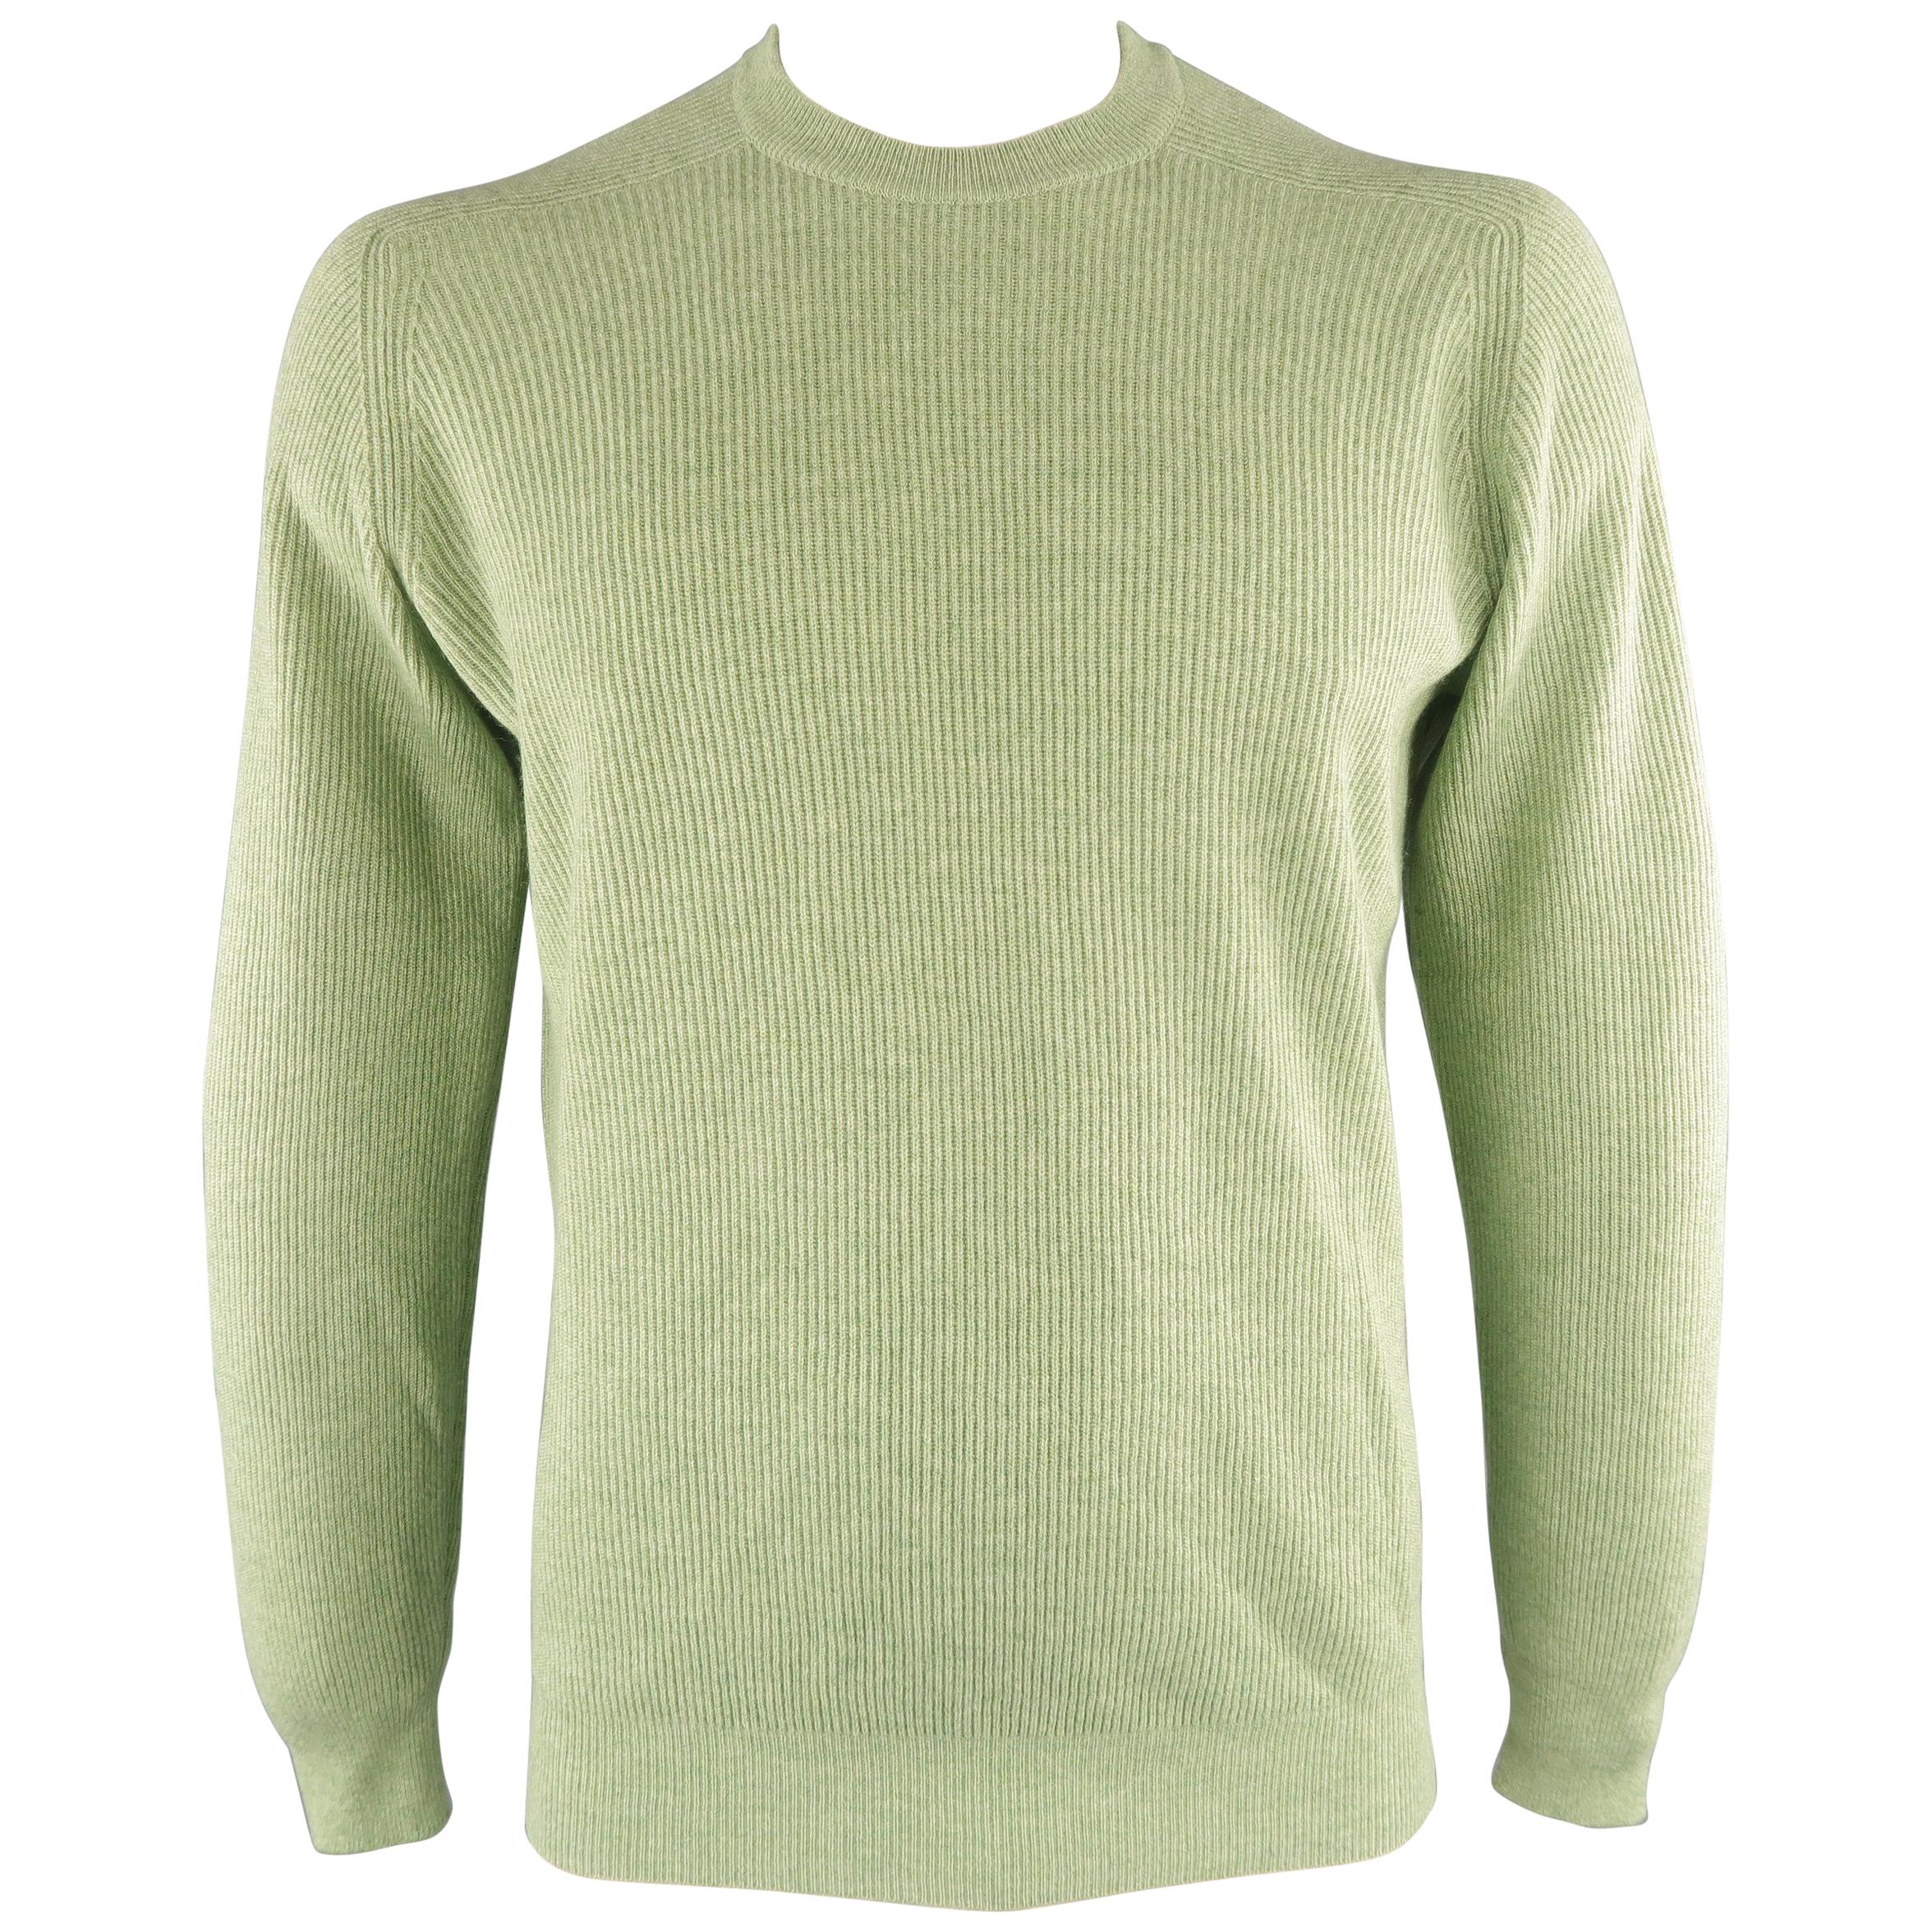 Men's BRUNELLO CUCINELLI Size 44 Green Ribbed Knit Cashmere Sweater